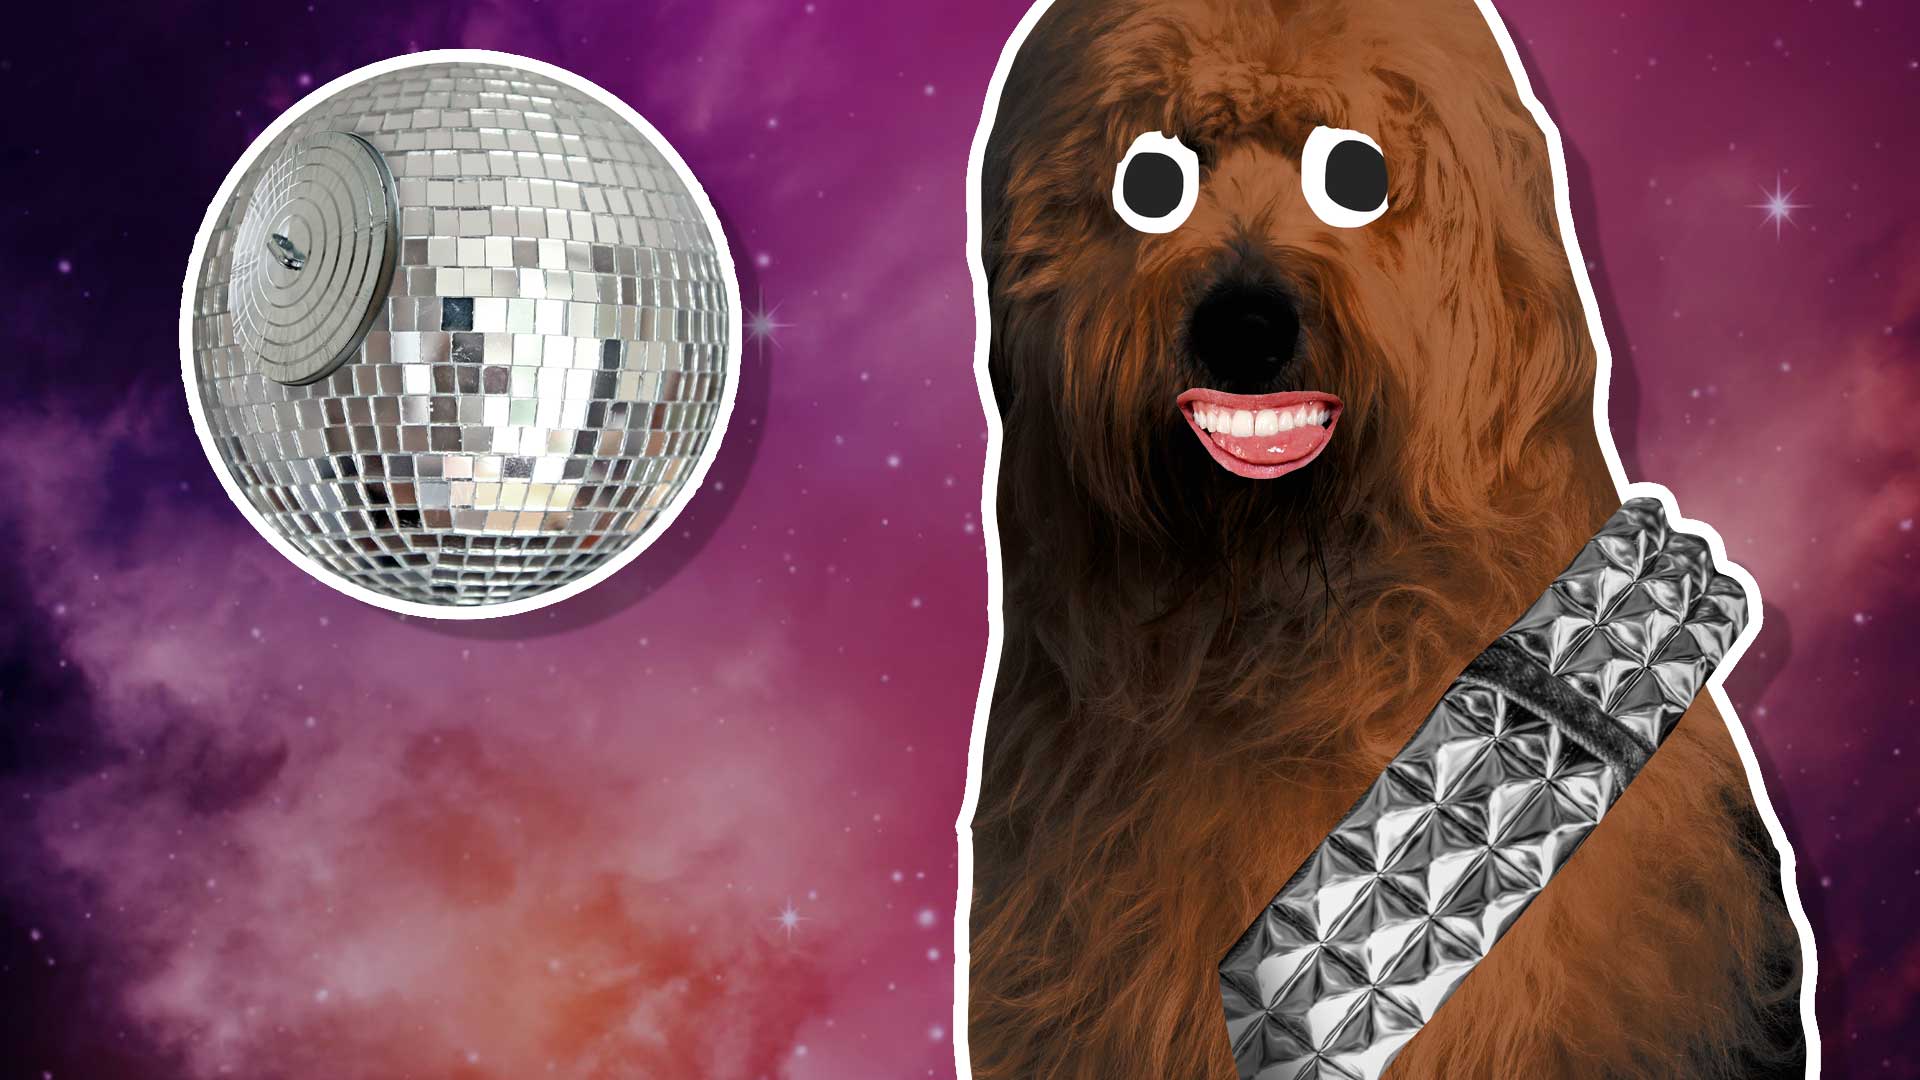 A Chewbacca lookalike and a mirror ball which looks like the Death Star